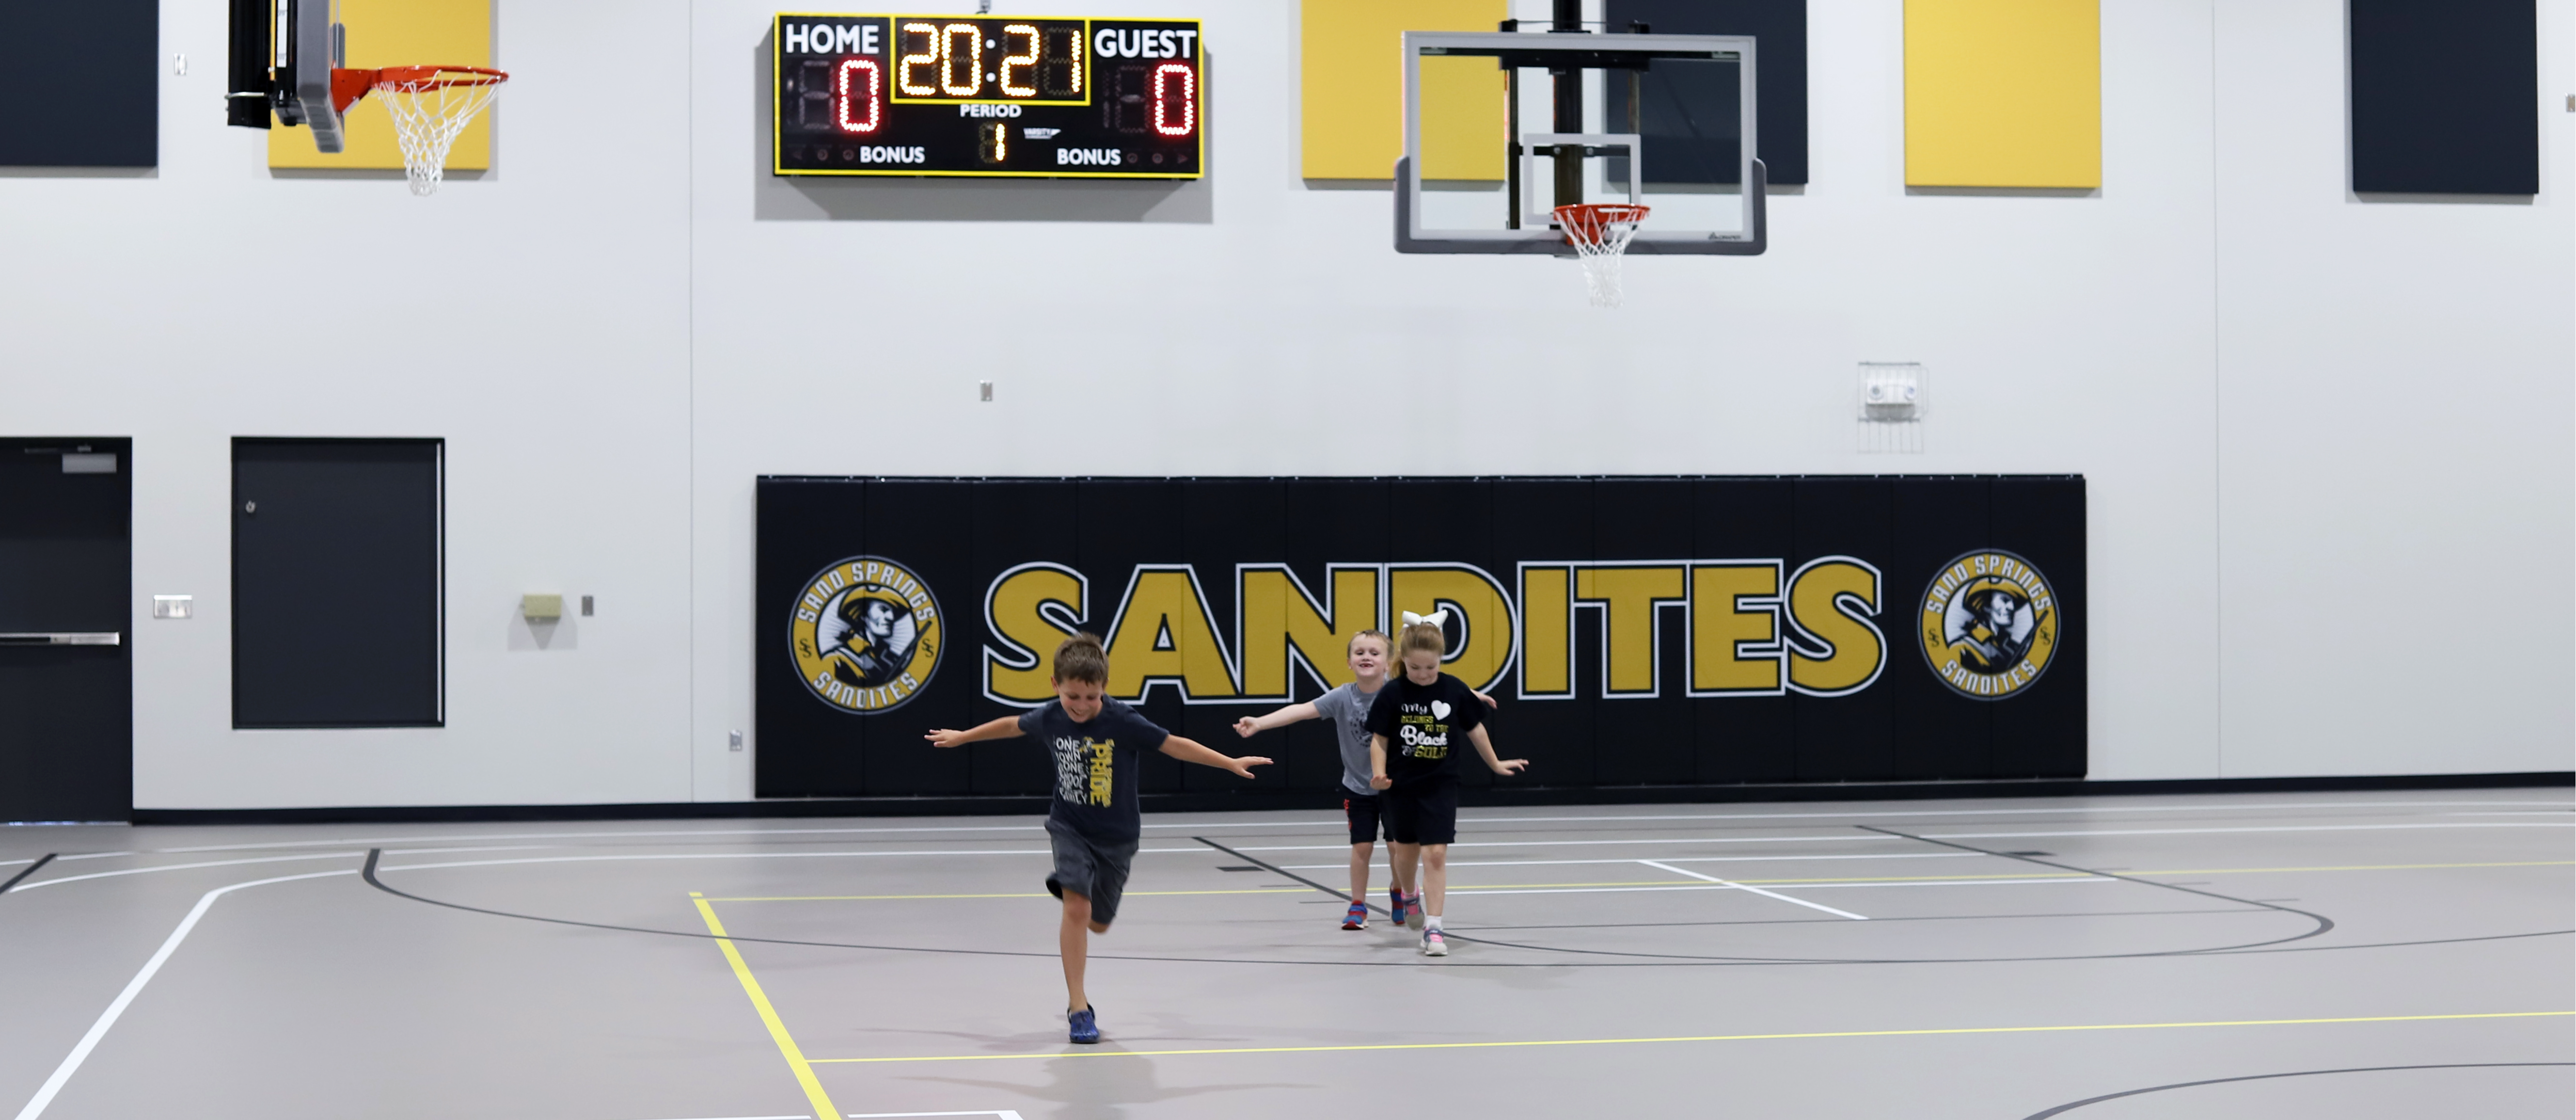 Kids running in a gymnasium with the text "Sandites" on the wall